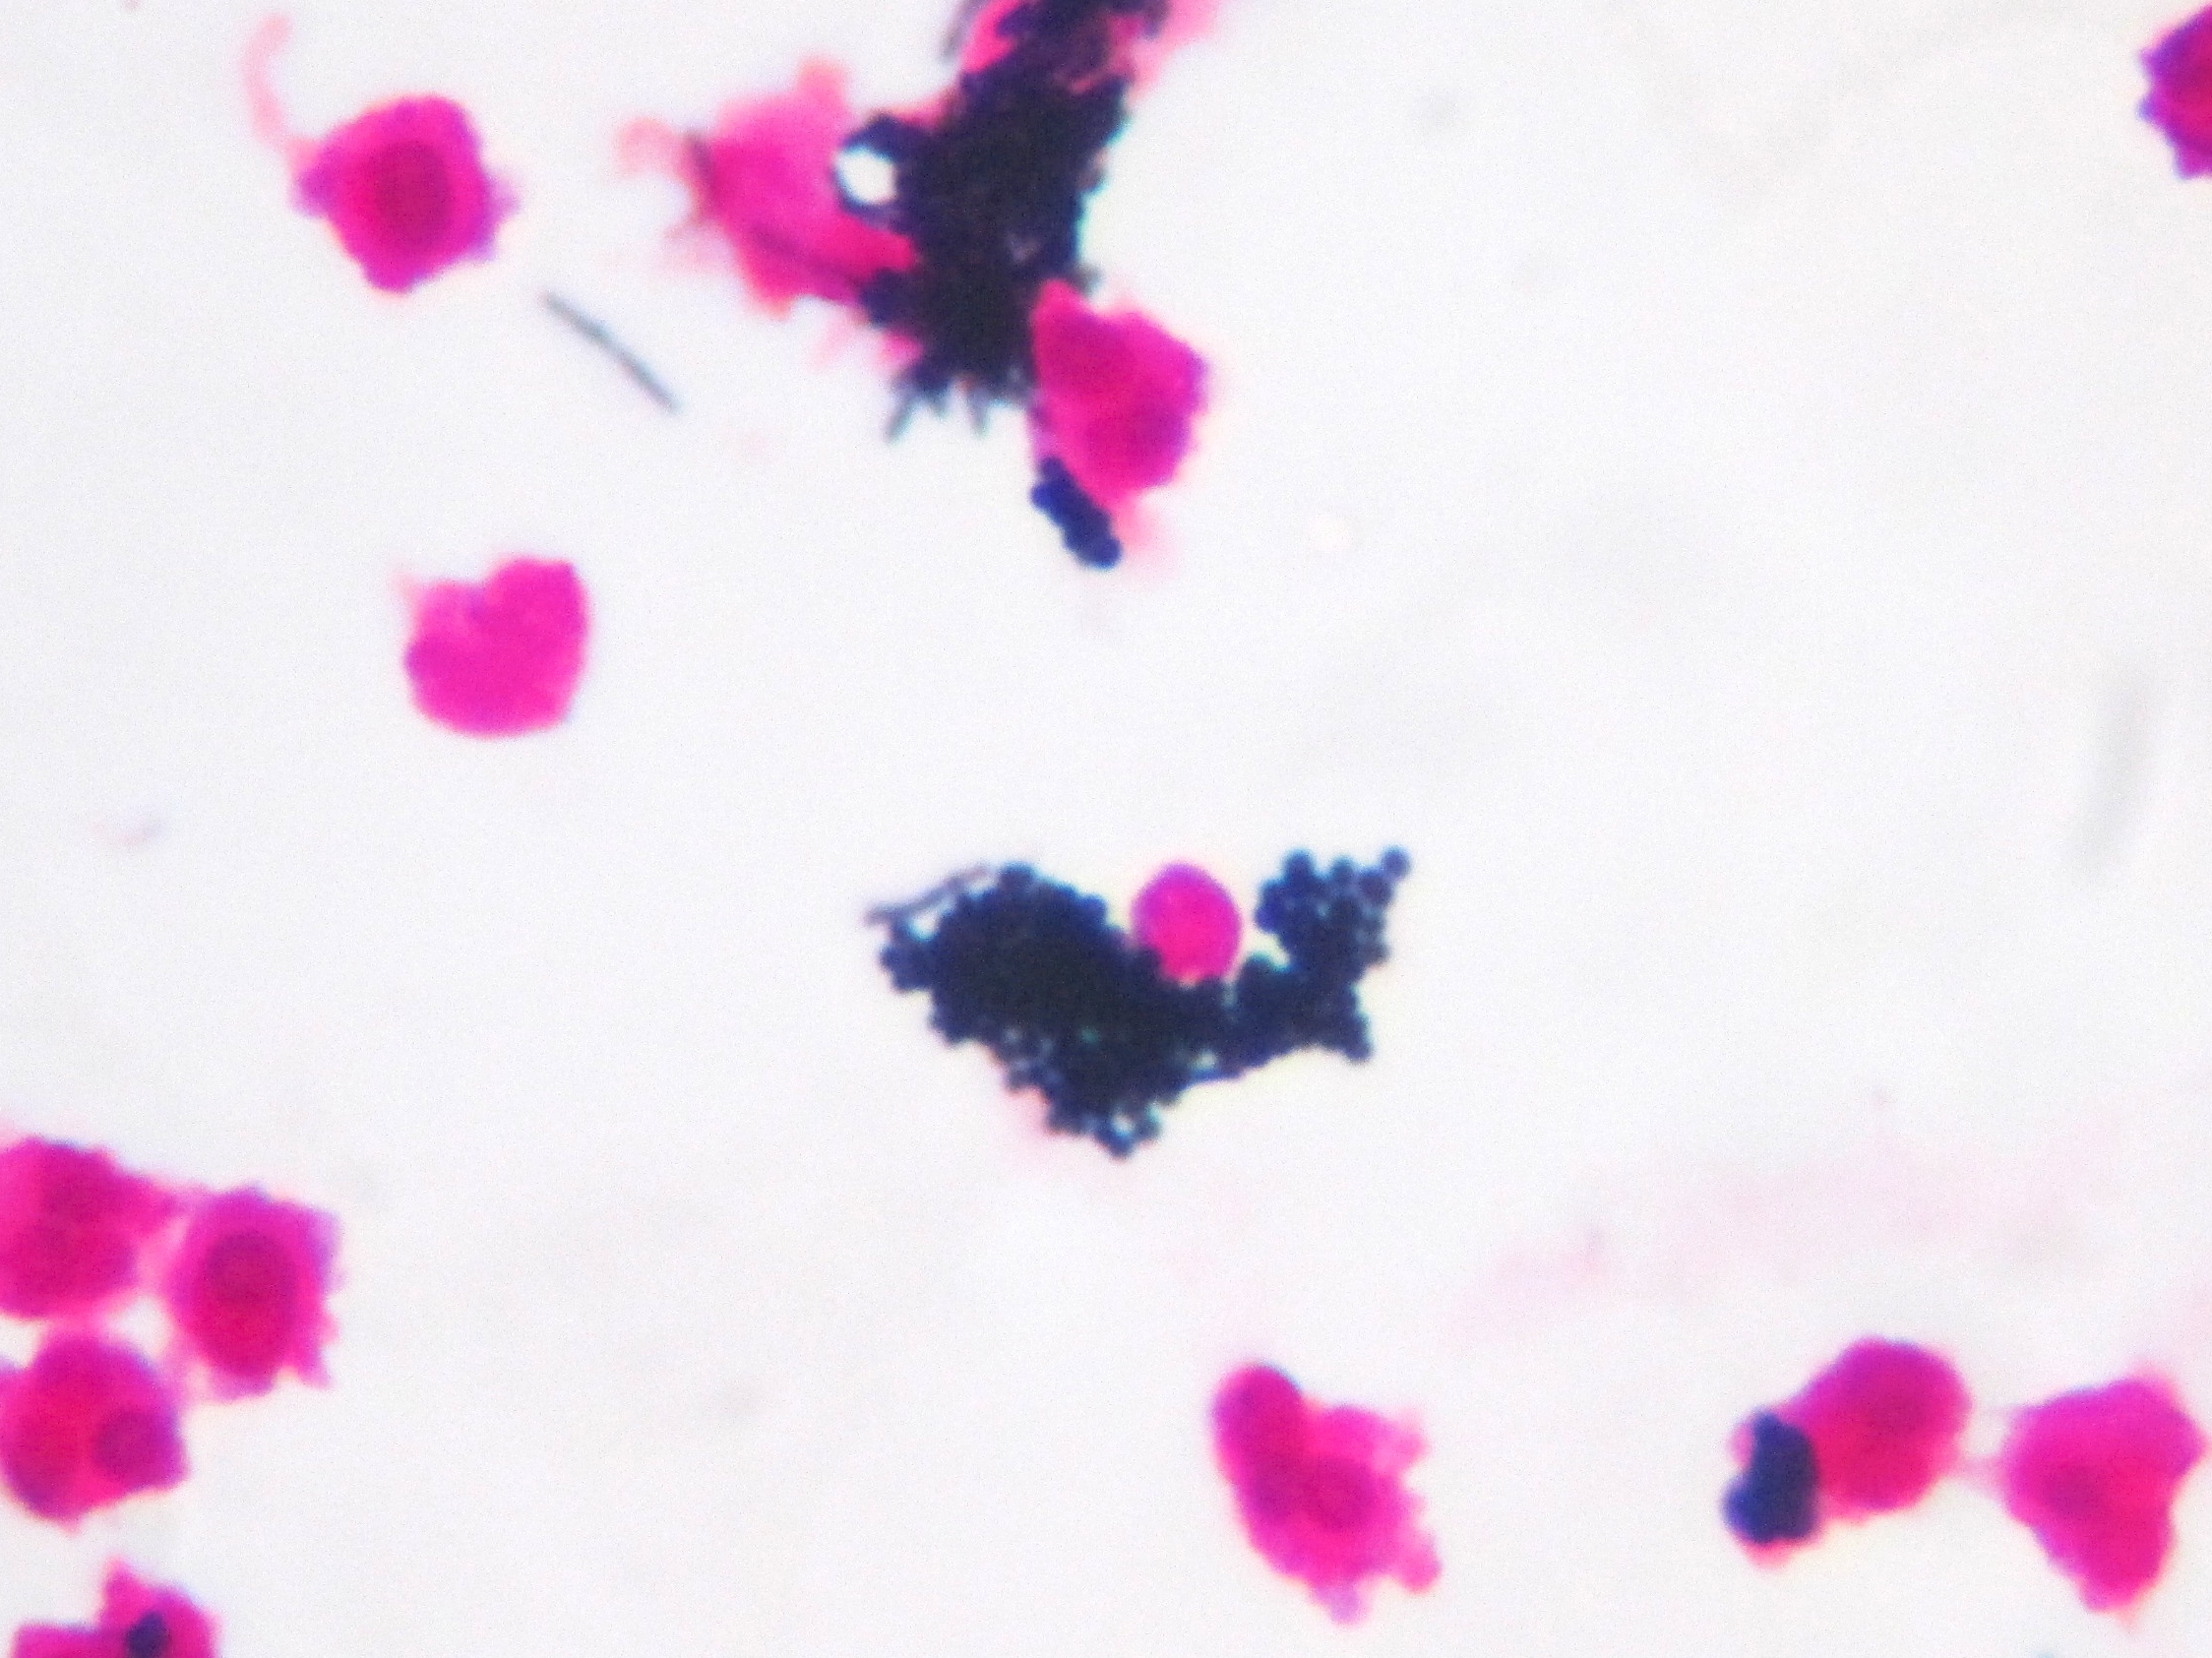 Staphylococcus saprophyticus〔腐性ブドウ球菌〕